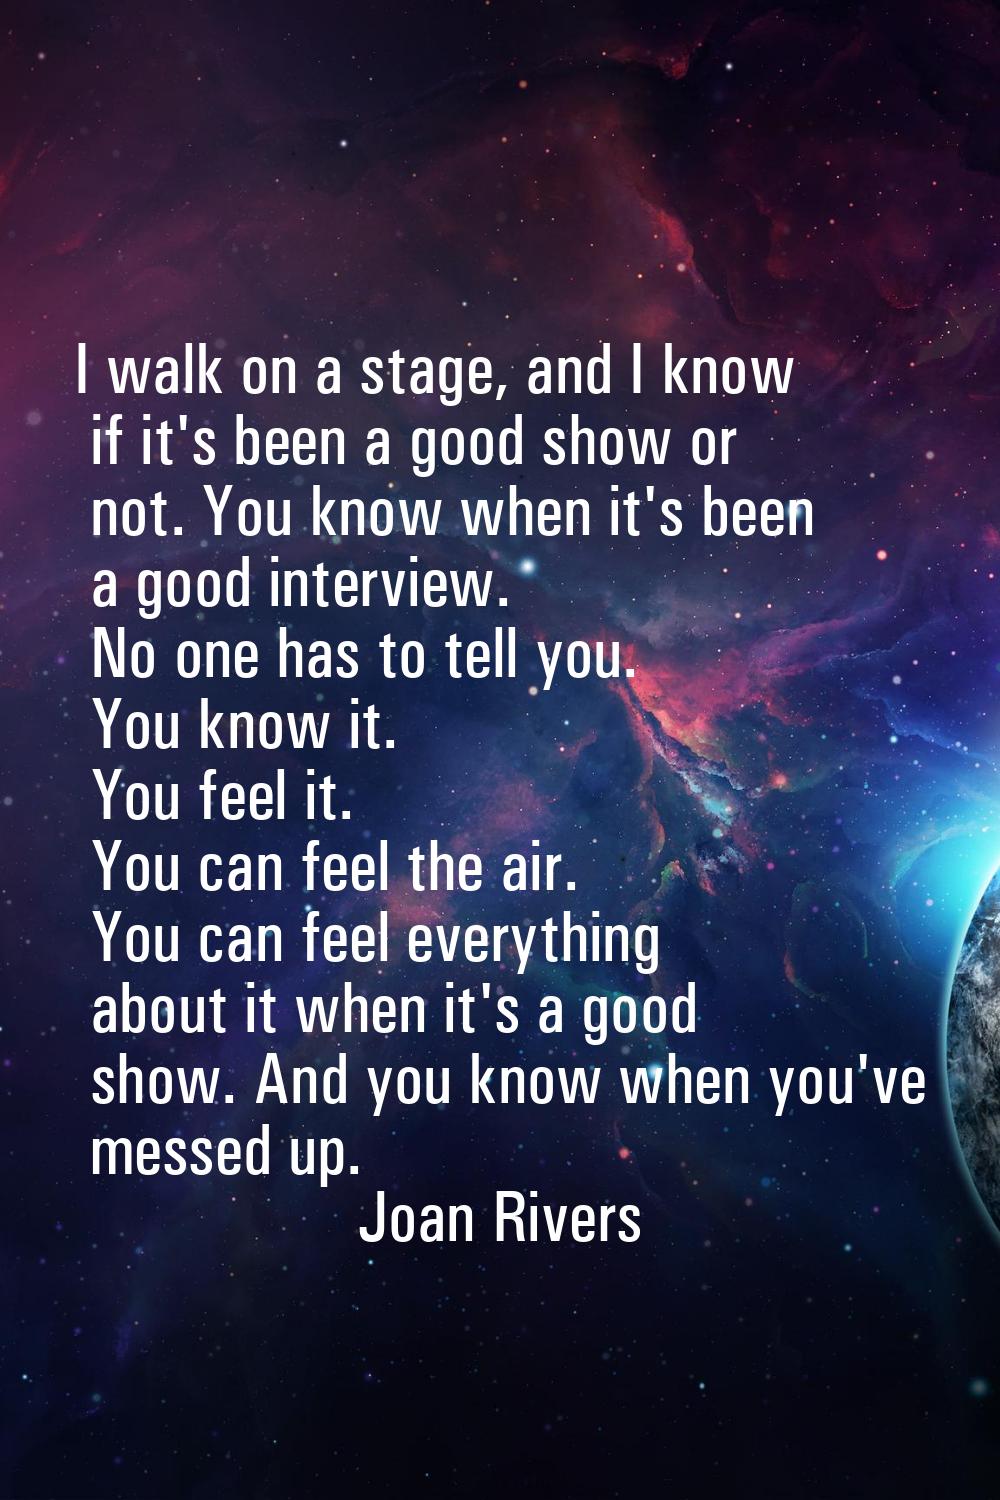 I walk on a stage, and I know if it's been a good show or not. You know when it's been a good inter